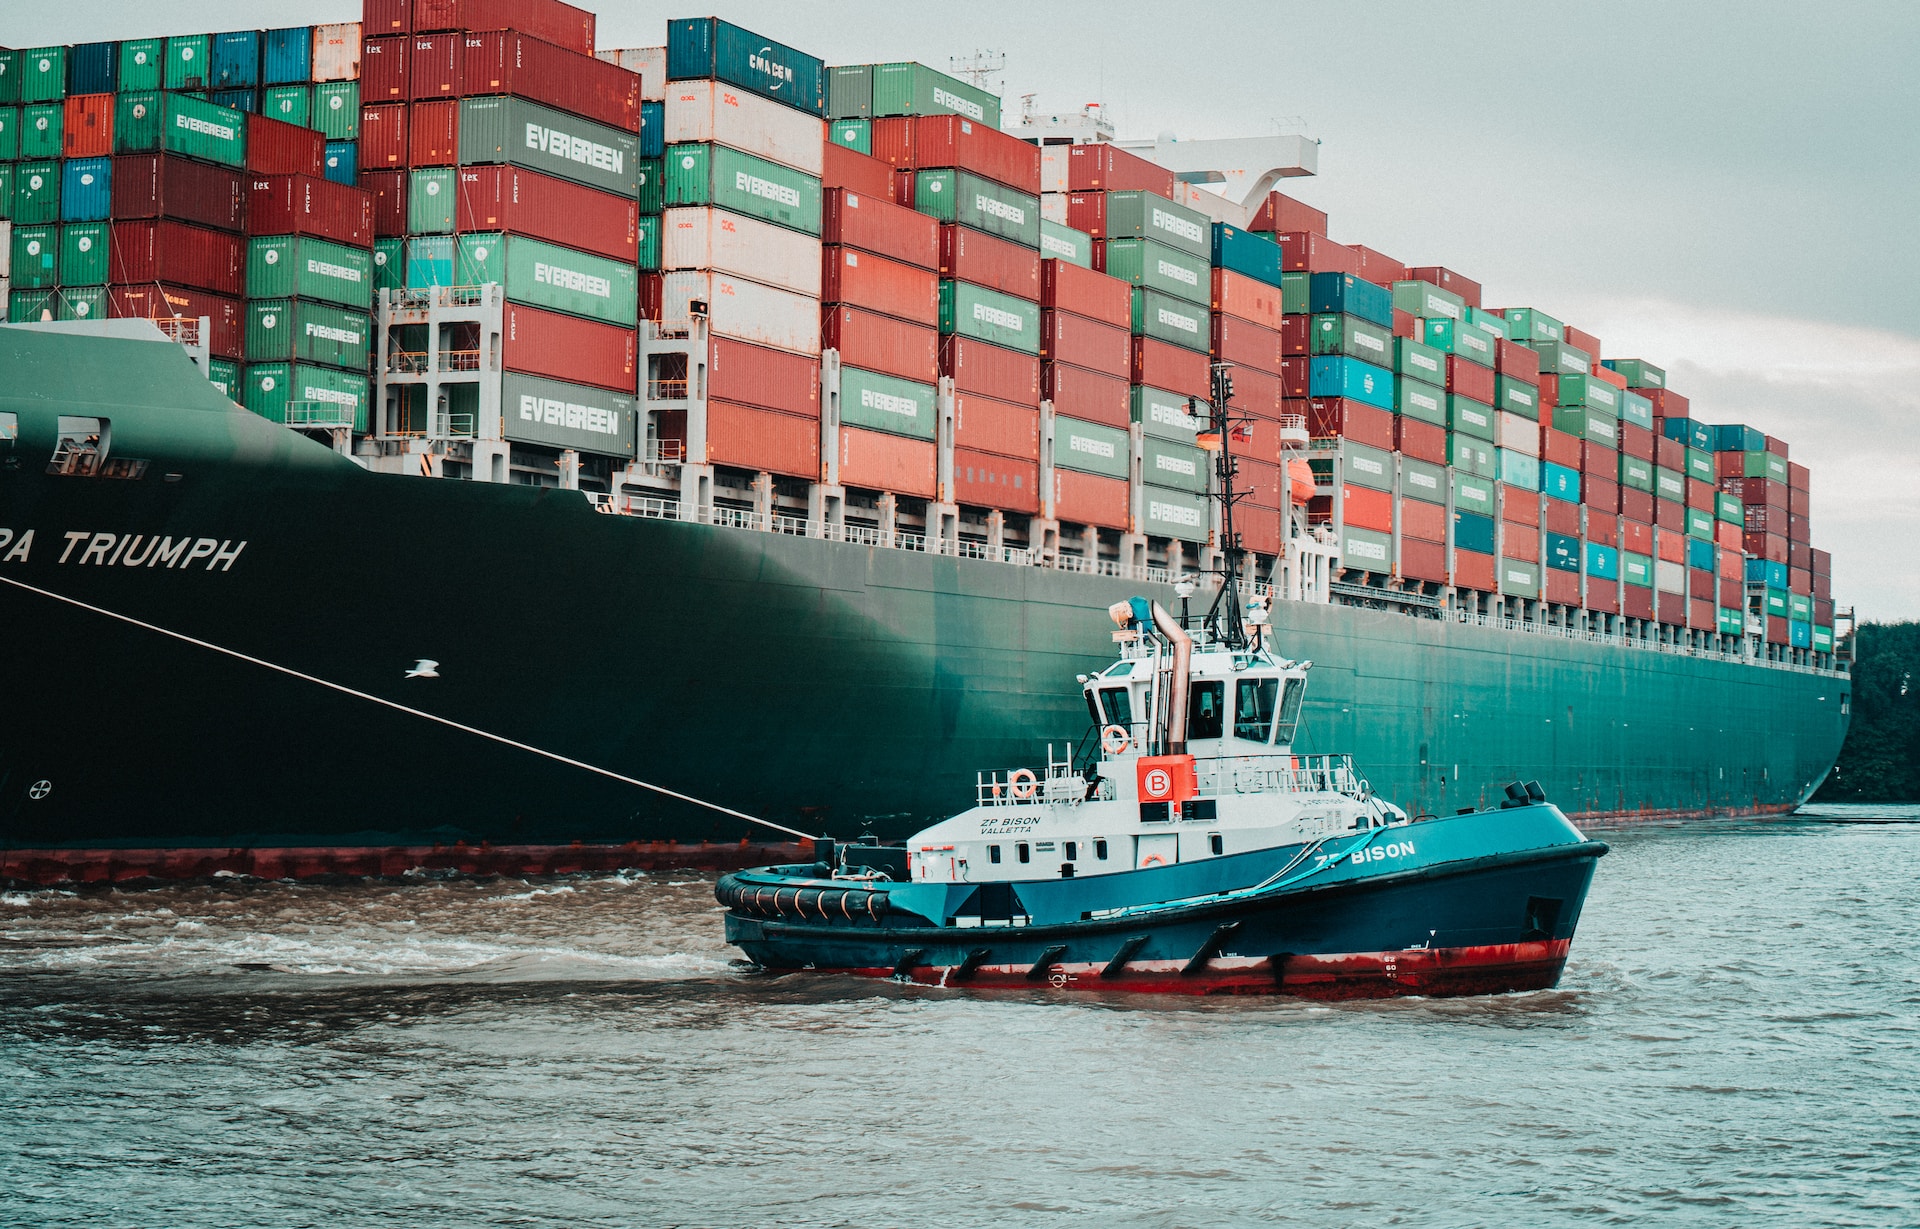 Tug boat pulling a large container ship. Image: Mika Baumeister on Unsplash